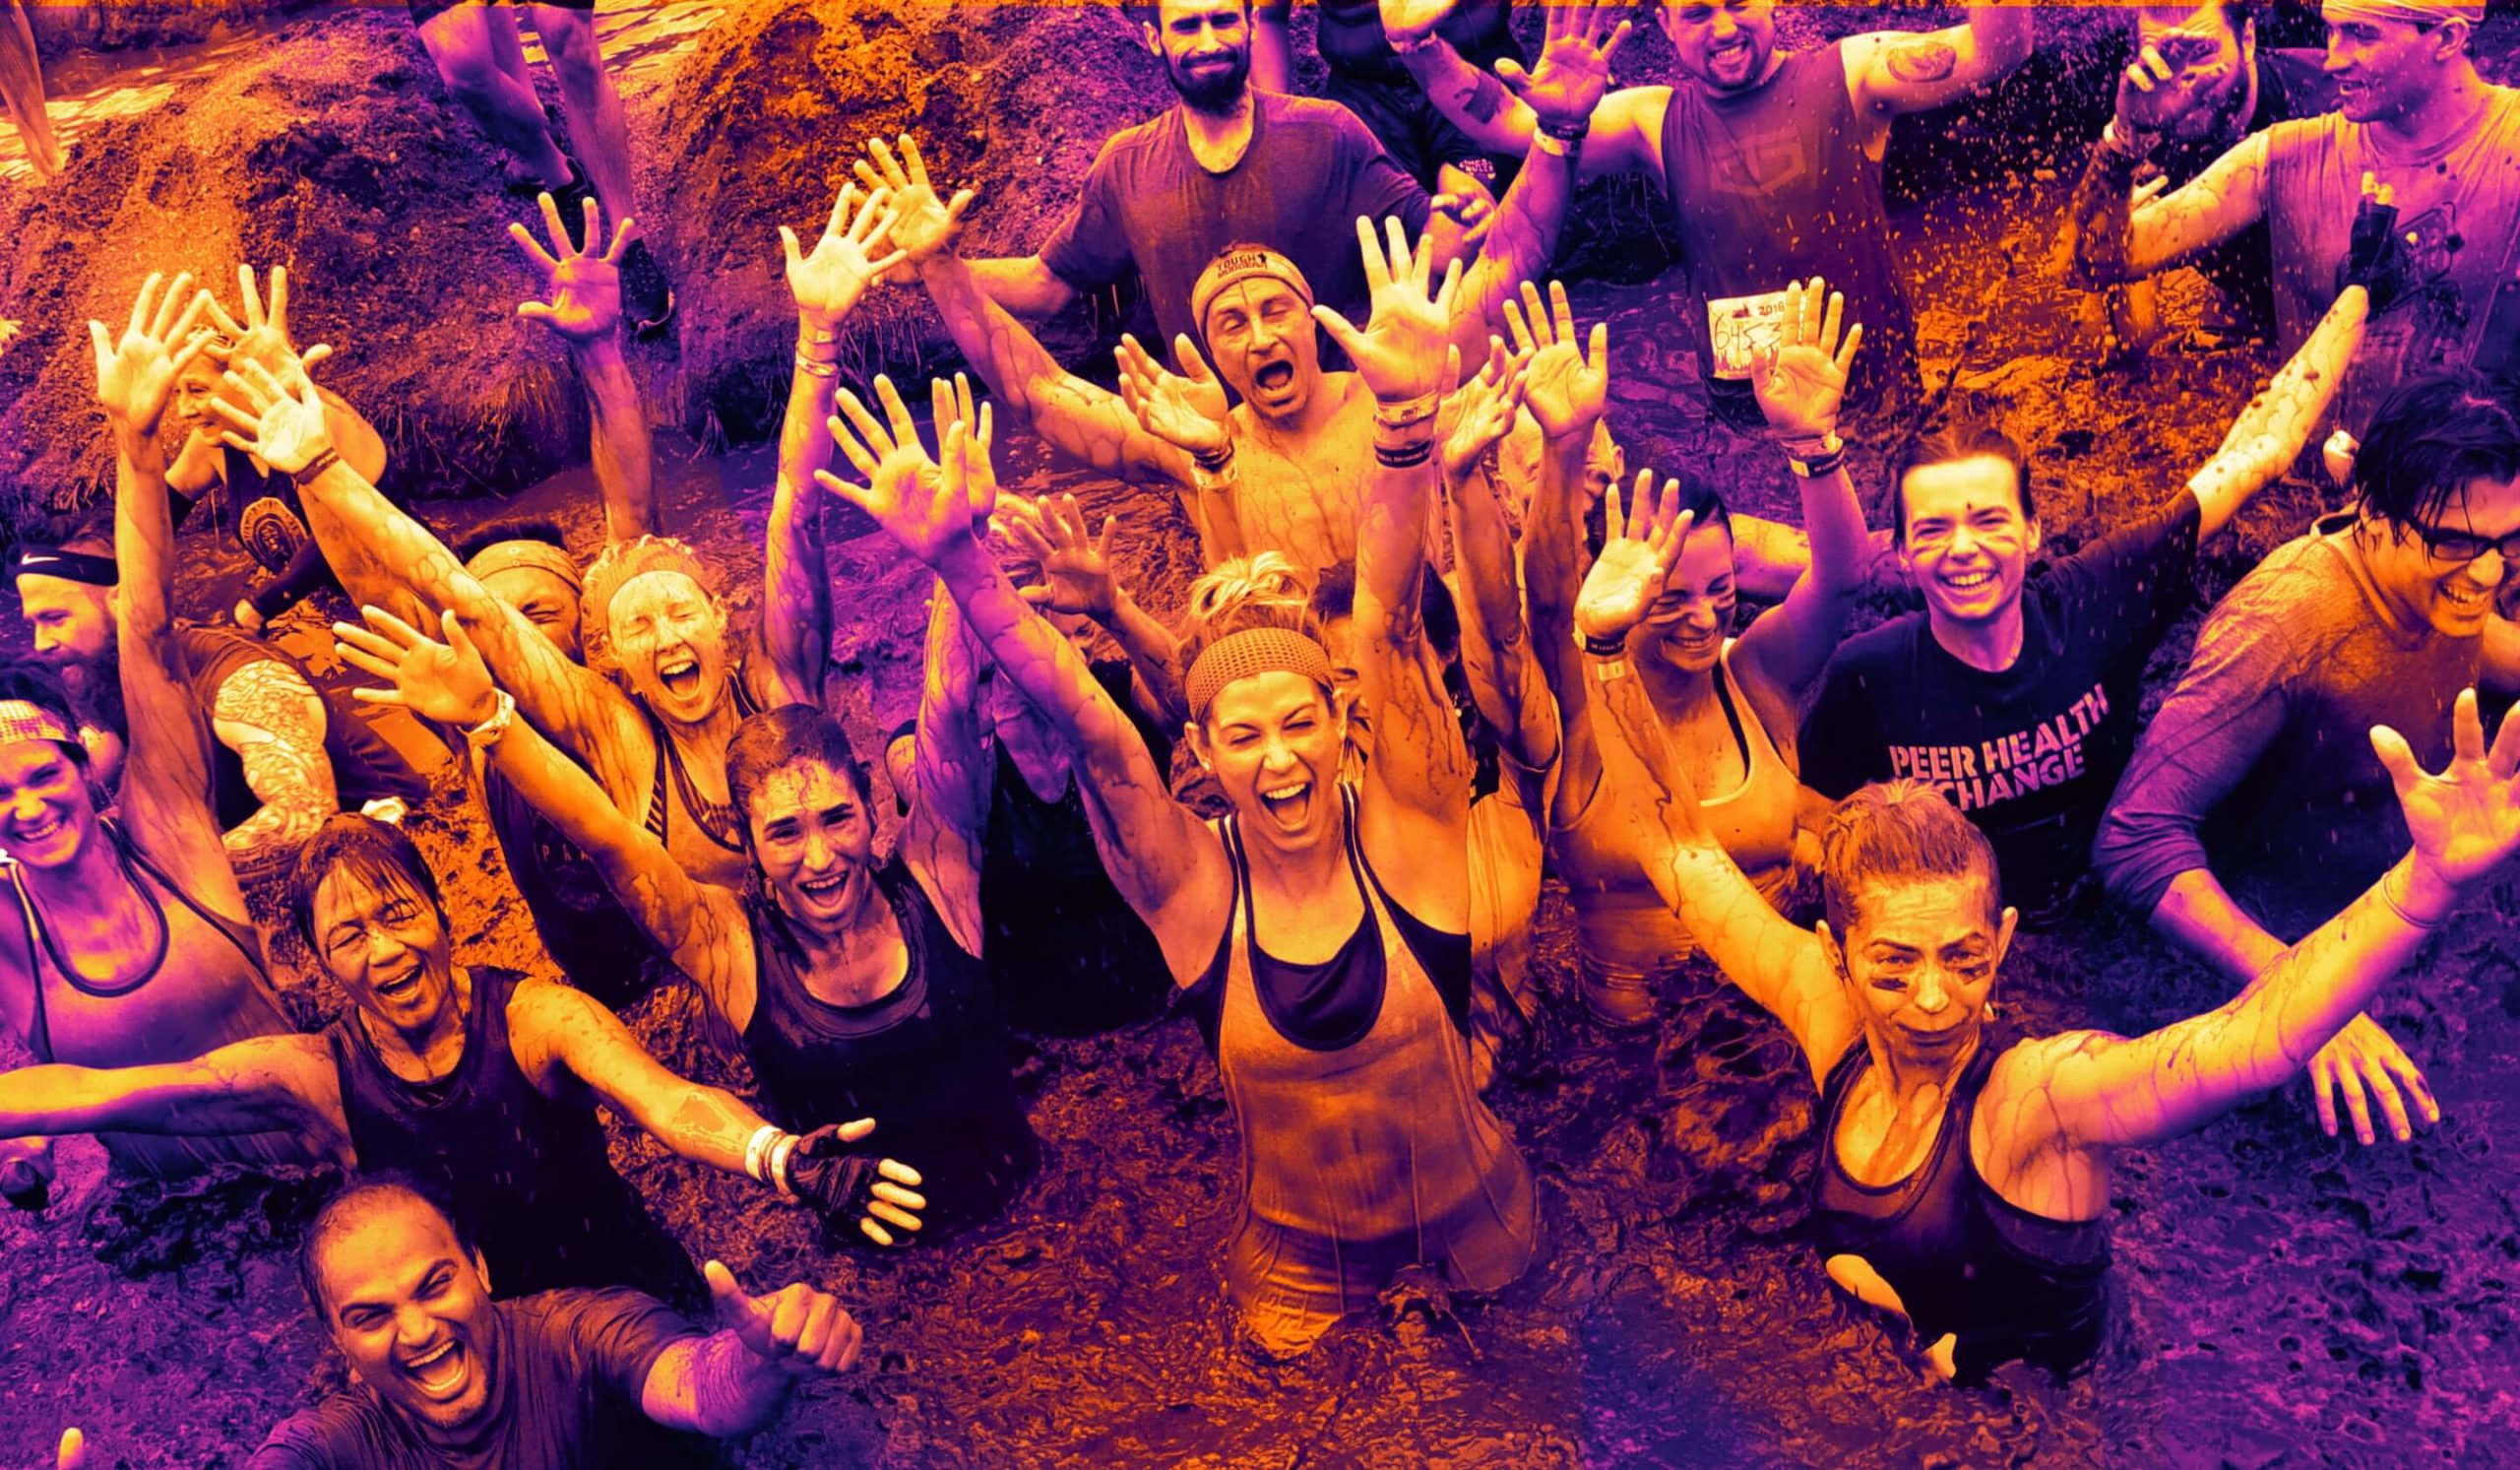 Tough Mudder Australia The World's Best Mud Run and Obstacle Course